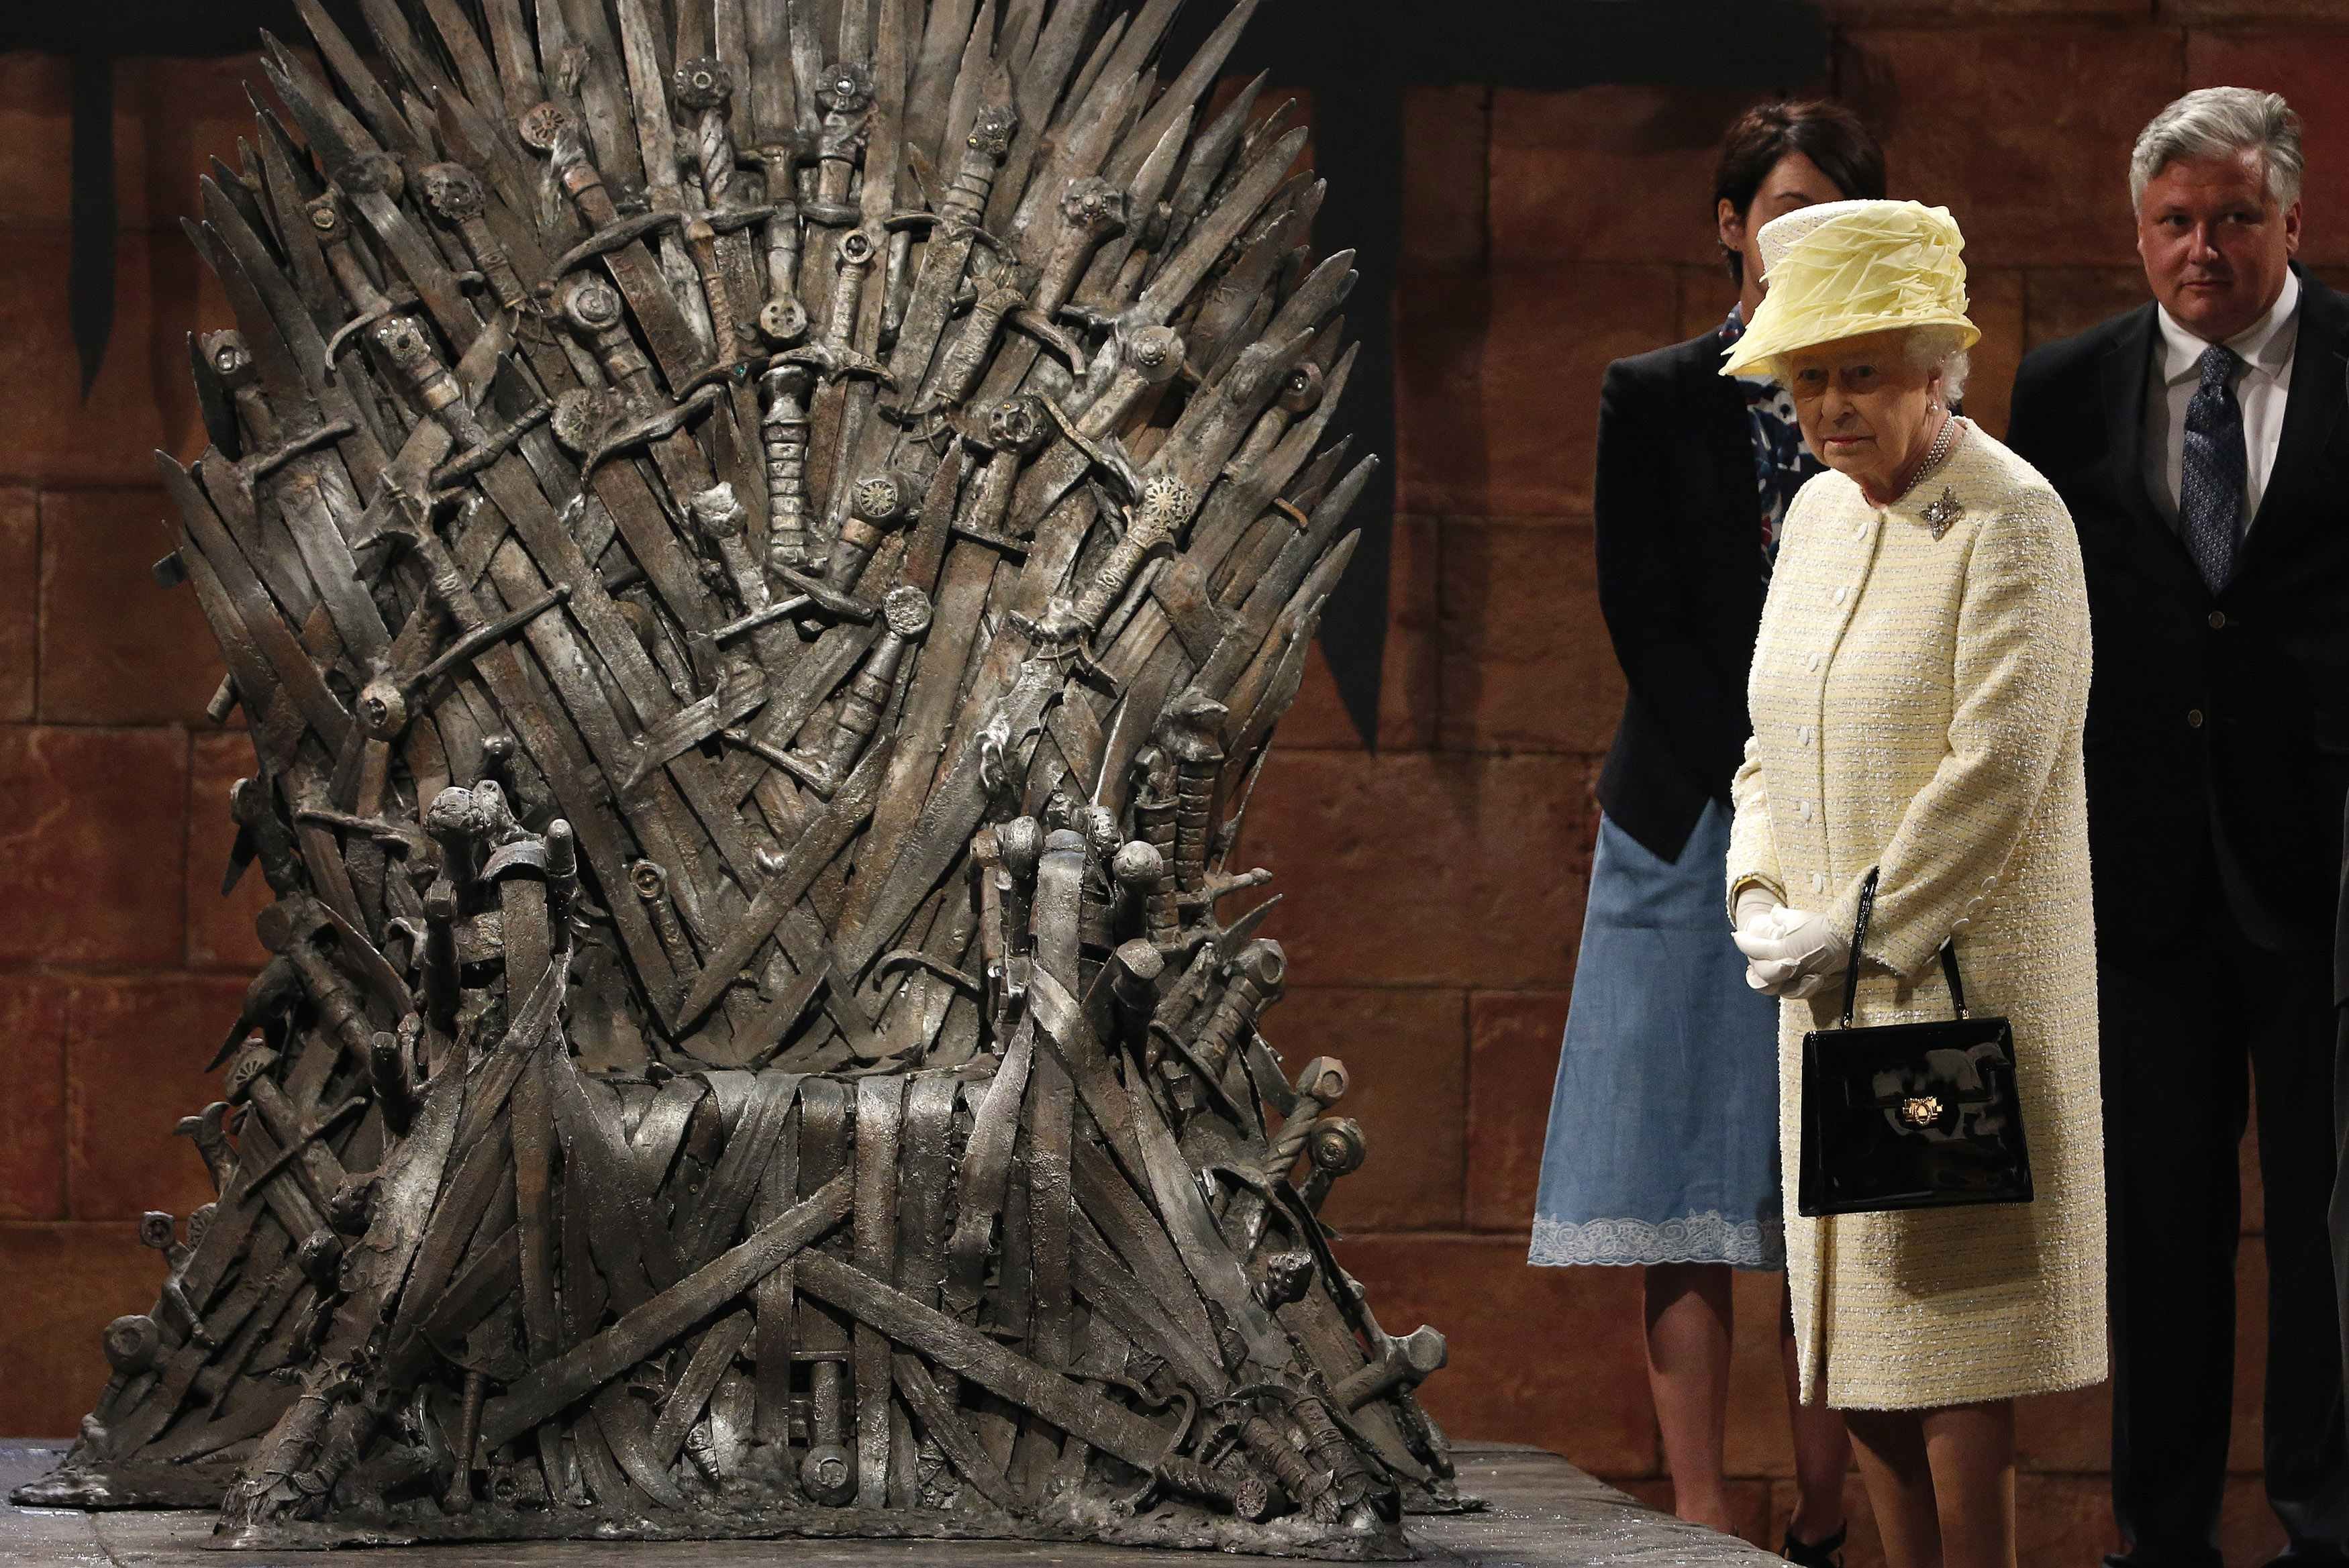 Britain's Queen Elizabeth looks at the Iron Throne as she meets members of the cast on the set of the television show Game of Thrones in the Titanic Quarter of Belfast, Northern Ireland, June 24, 2014. (Phil Noble—Reuters)